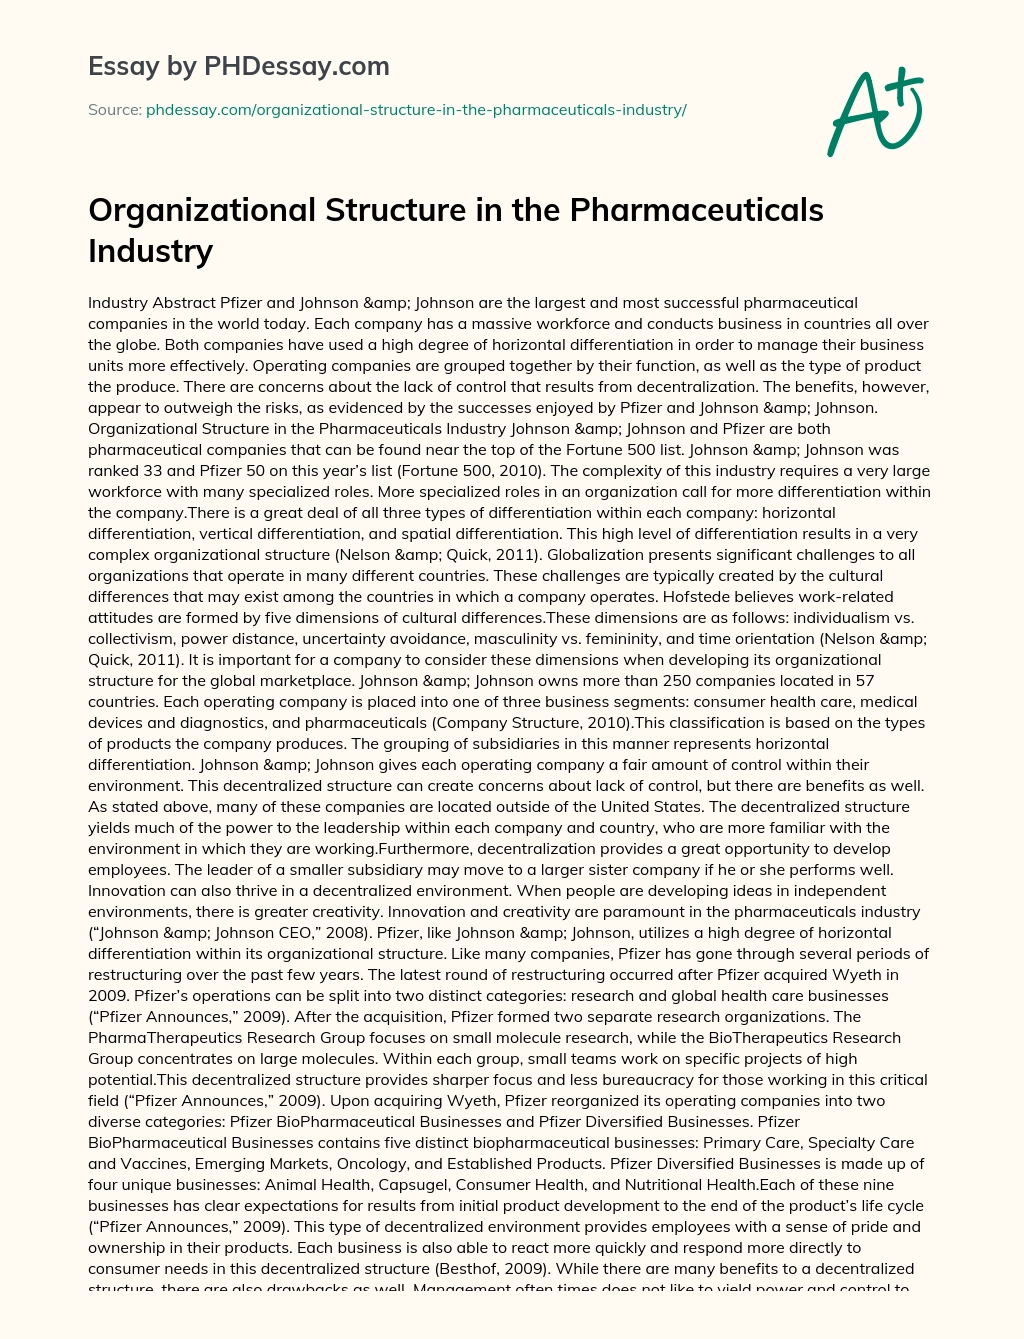 Organizational Structure in the Pharmaceuticals Industry essay